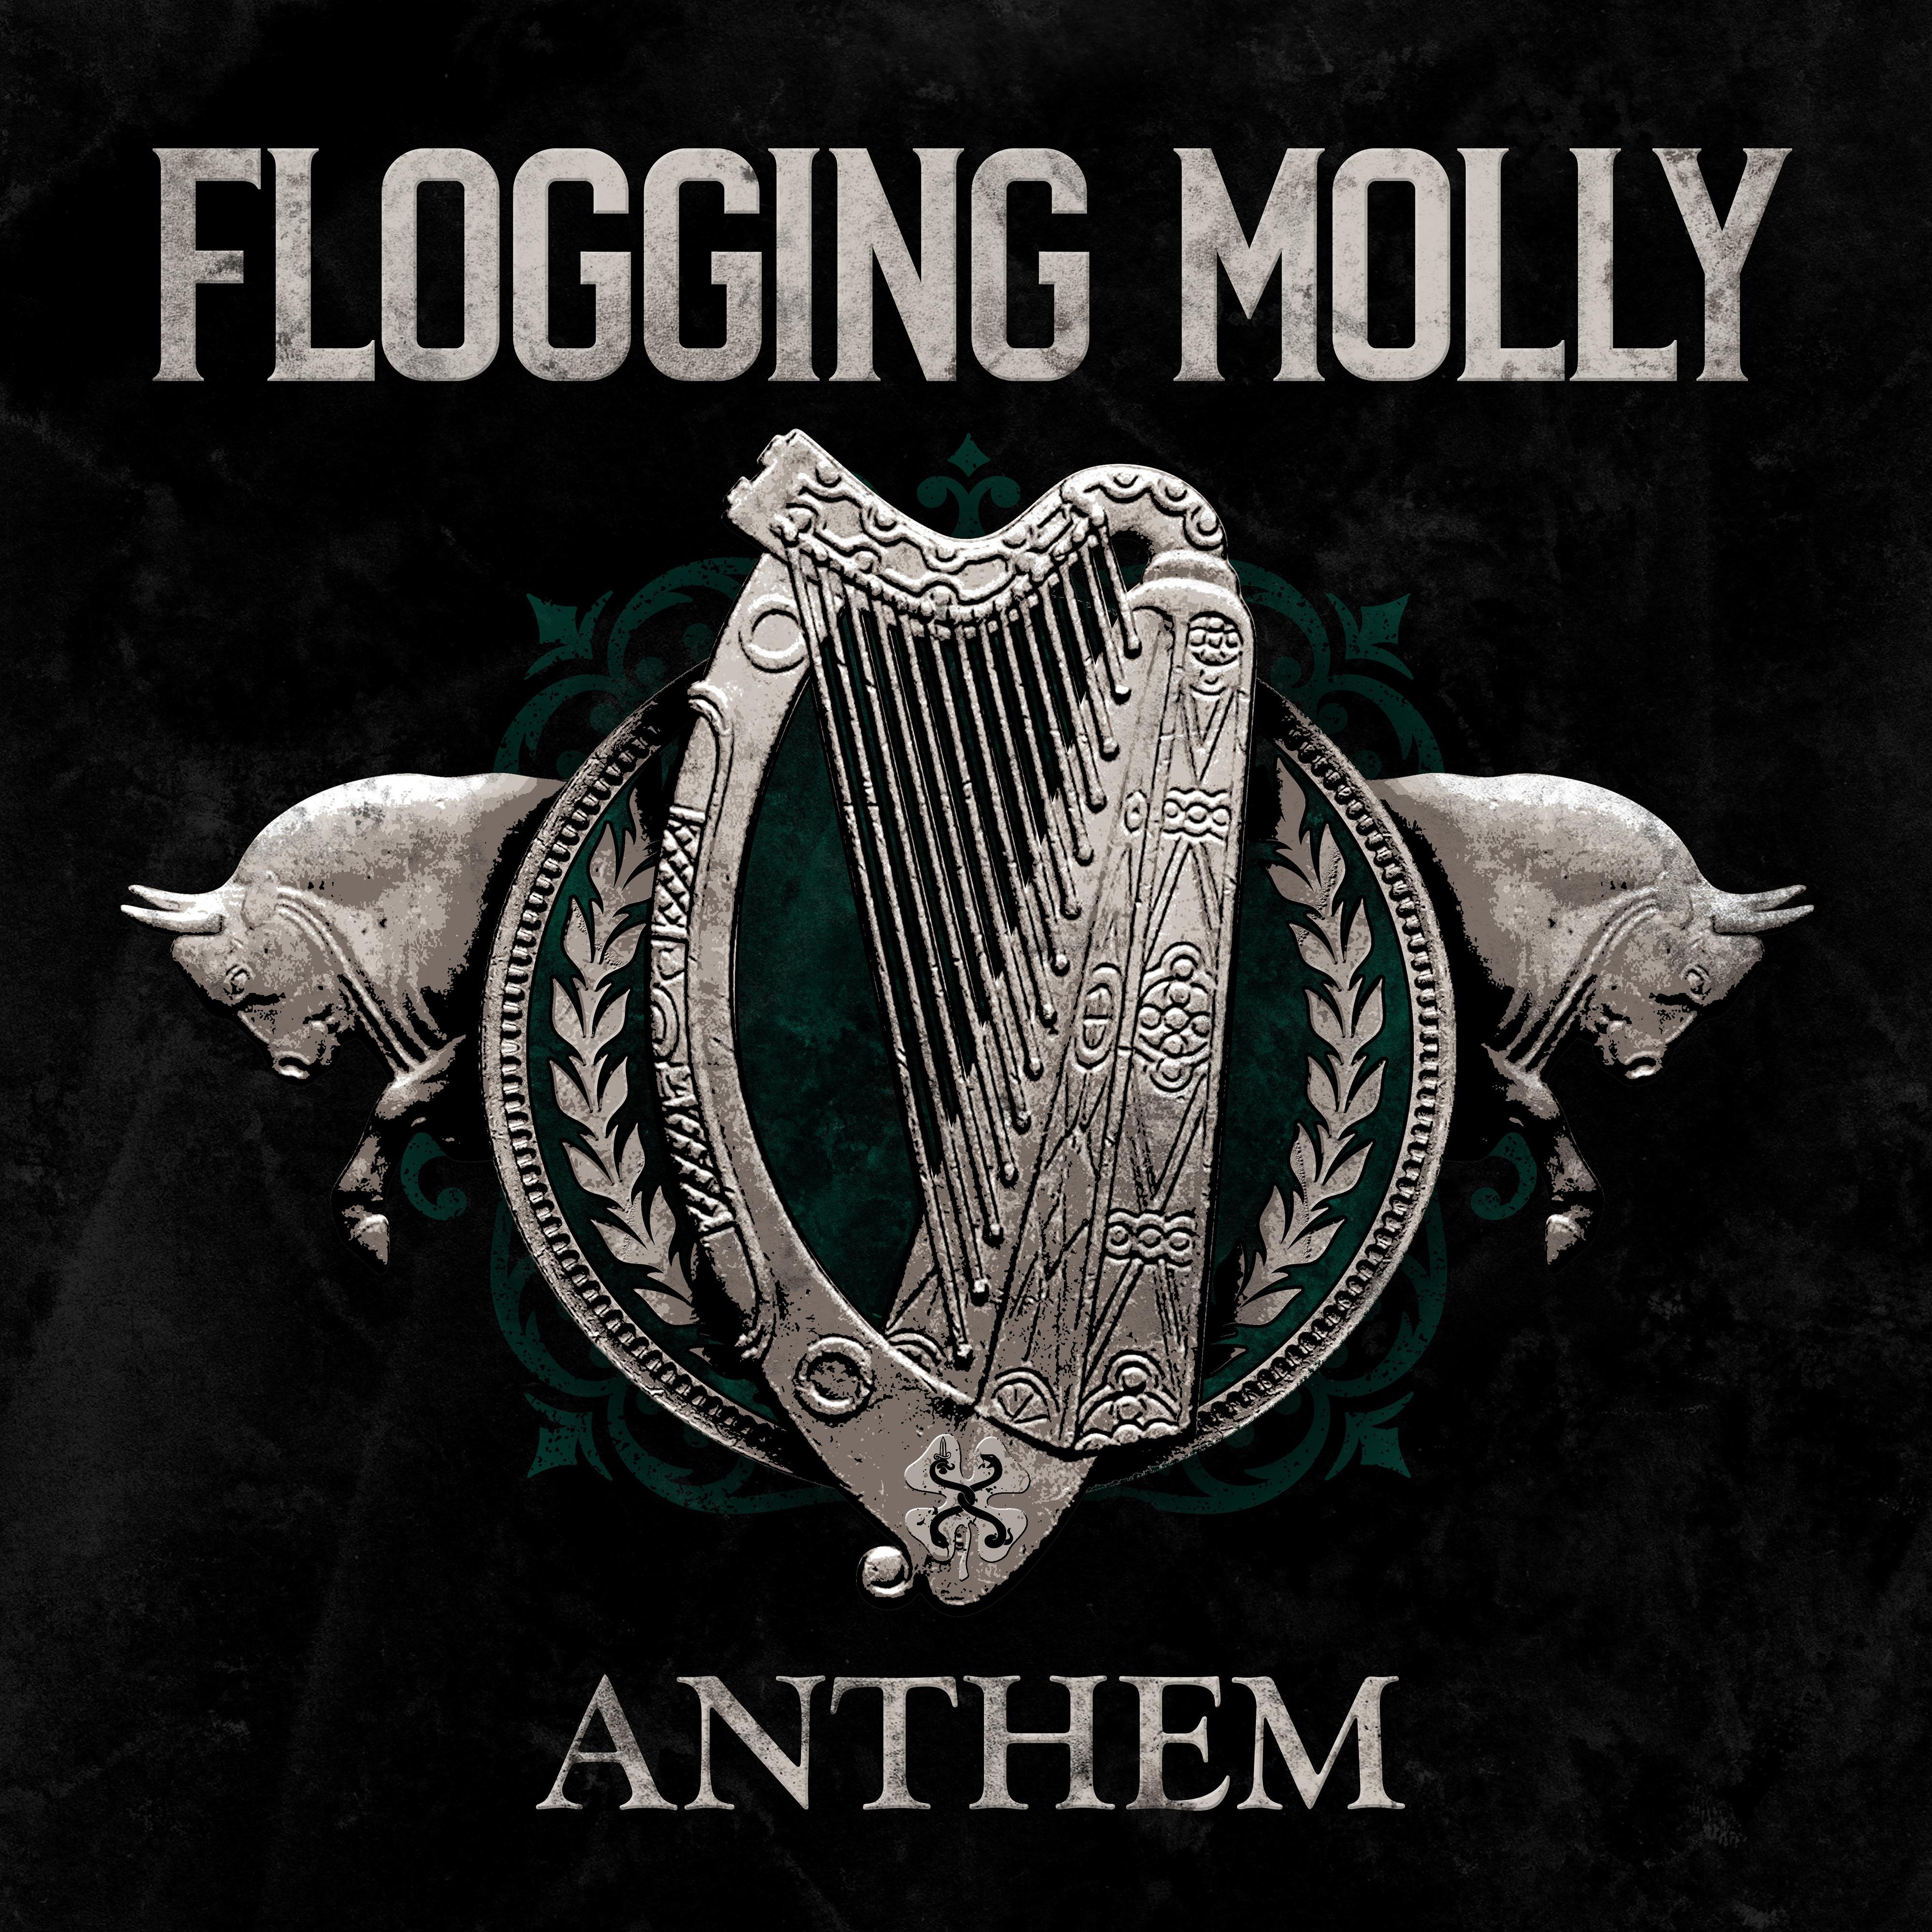 Flogging Molly - The Parting Wave